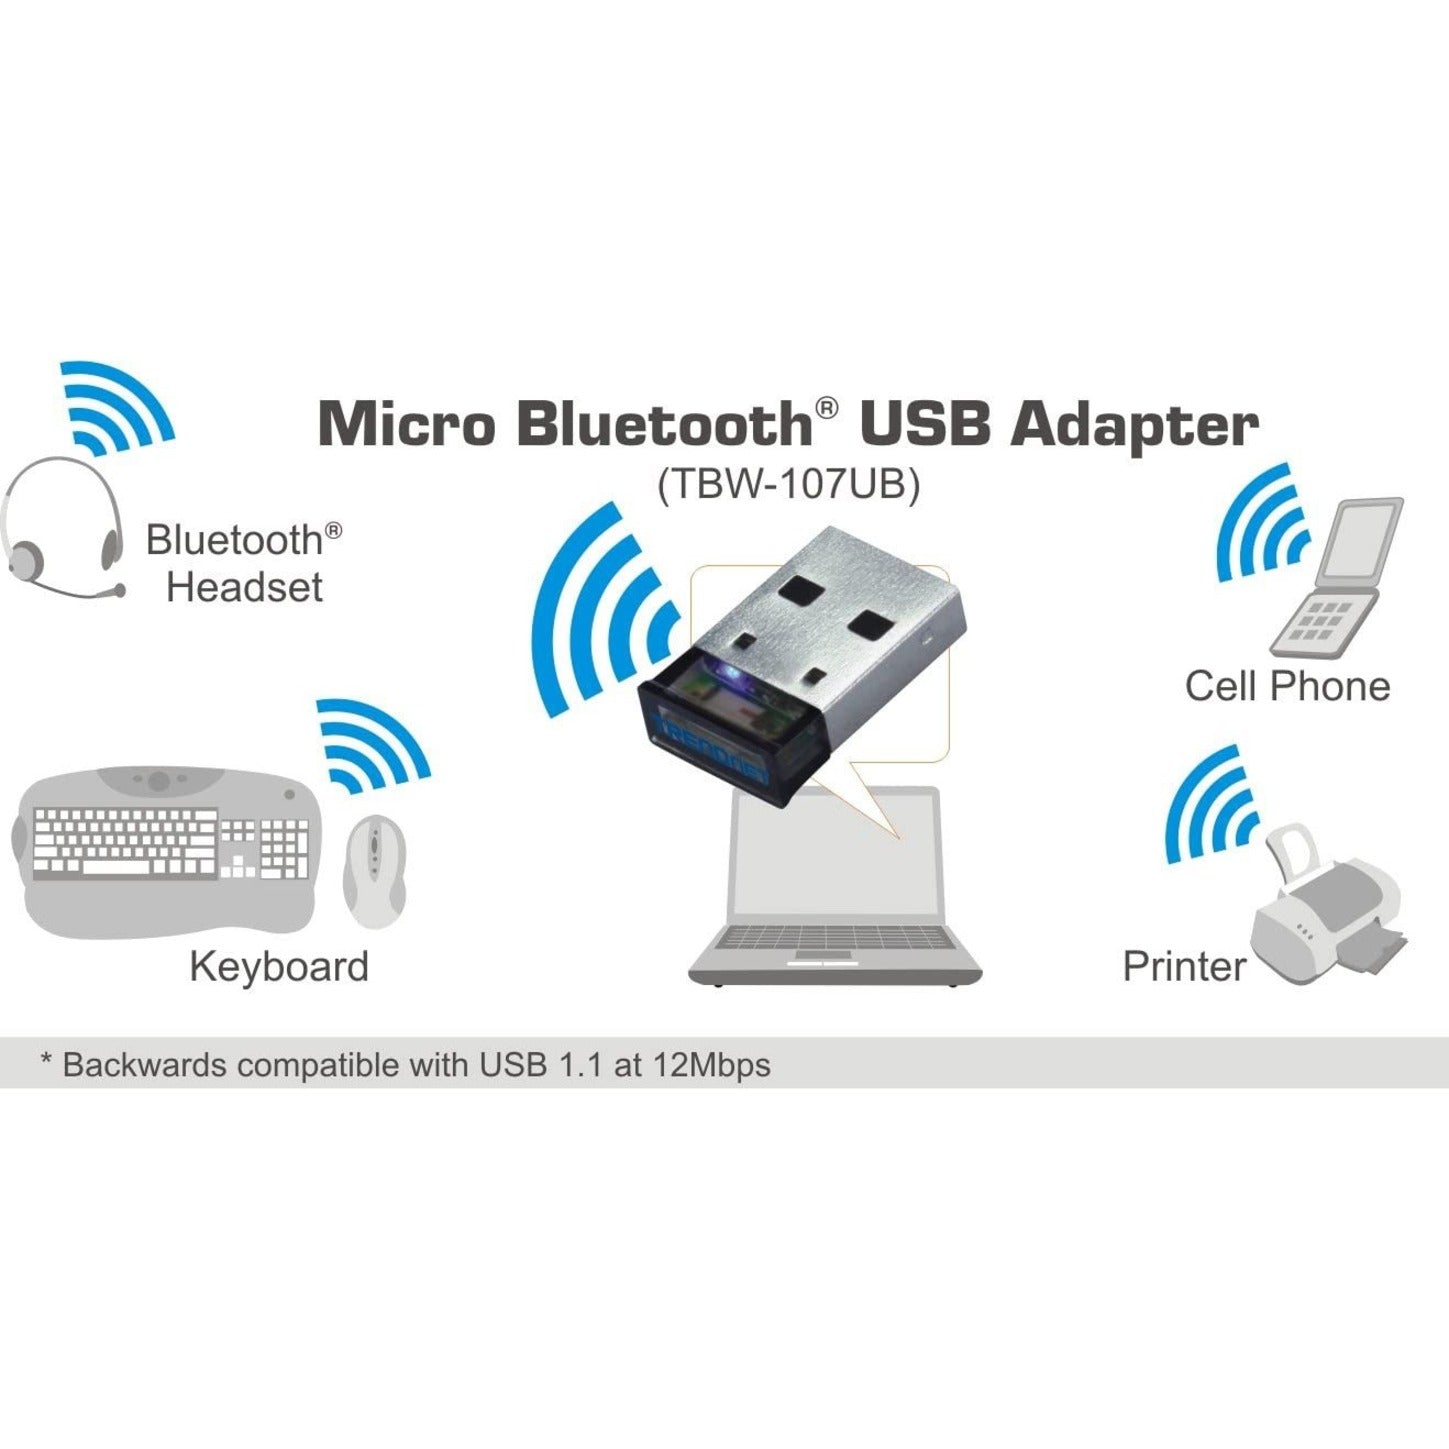 TRENDnet TBW-107UB Micro Bluetooth USB Adapter, Low Energy Class I, Distance up to 10 Meters/32.8 Feet, Win 8.1/8/7/Vista/XP Compatible